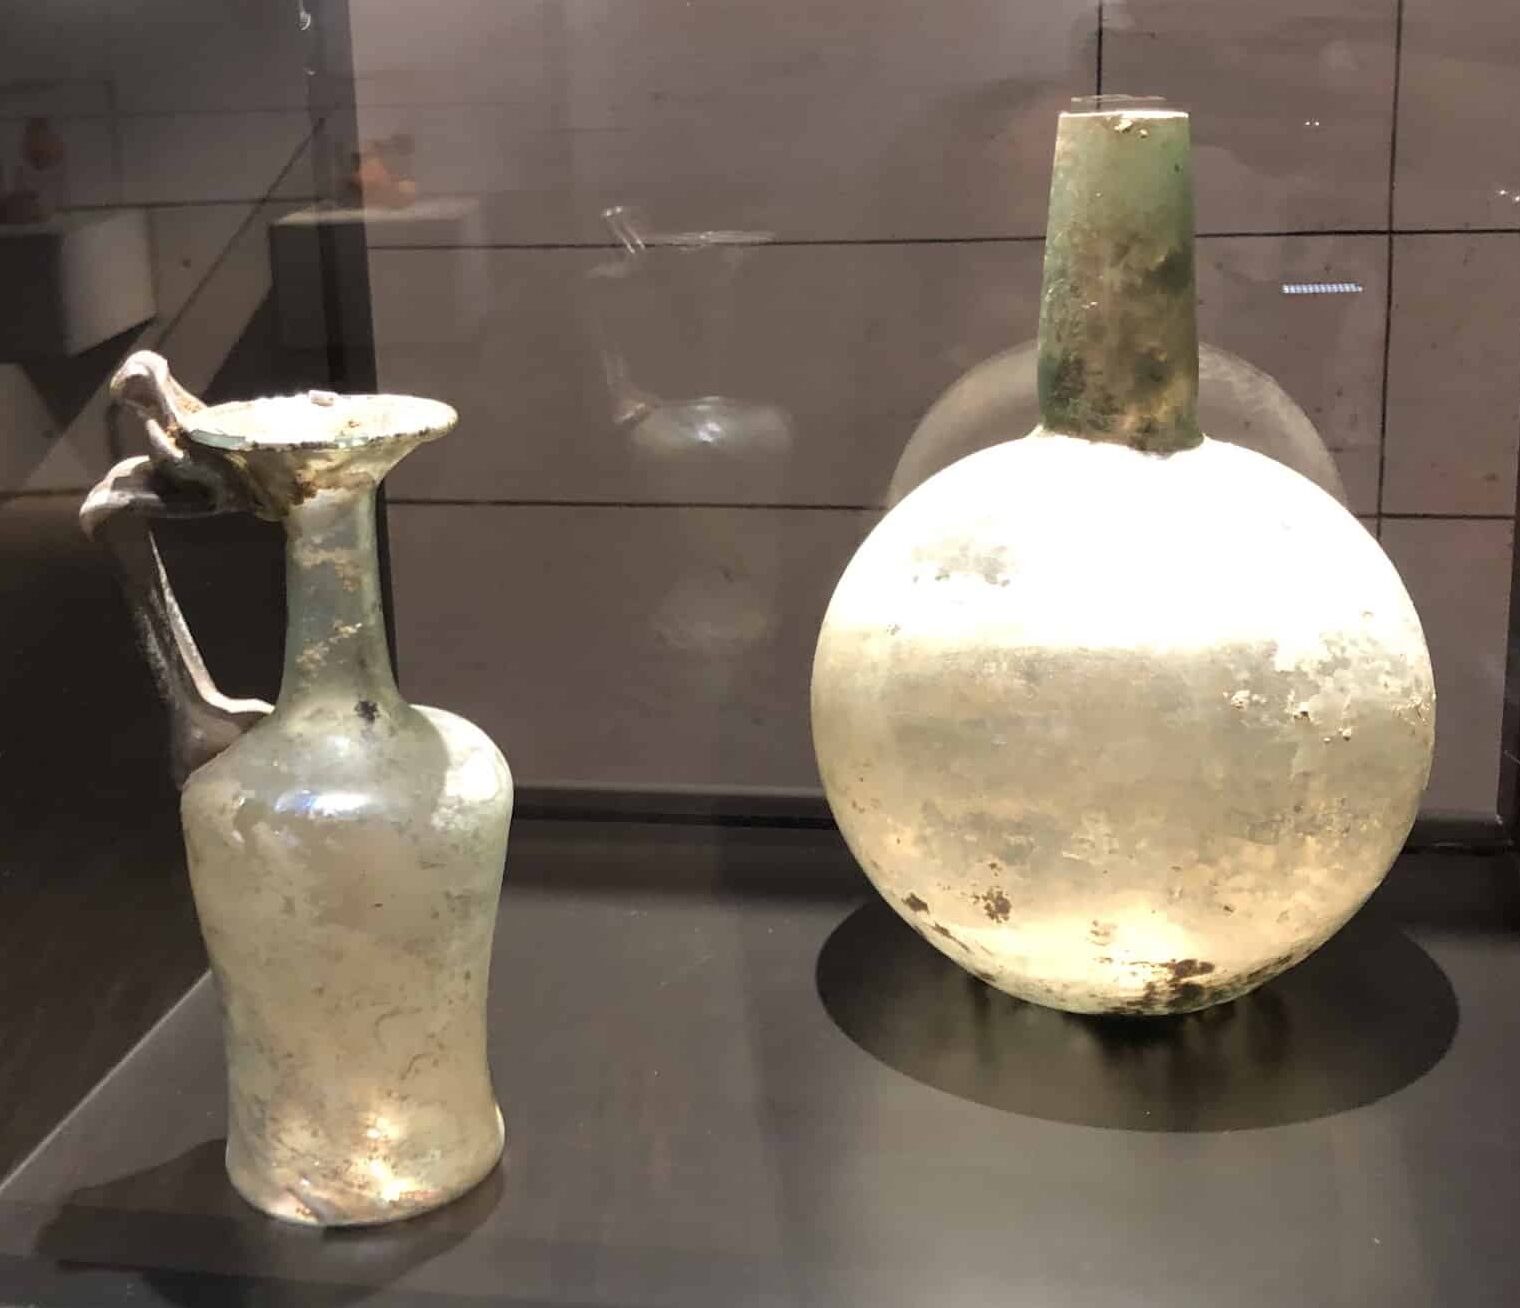 Glass jugs at the Erimtan Archaeology and Arts Museum in Ankara, Turkey